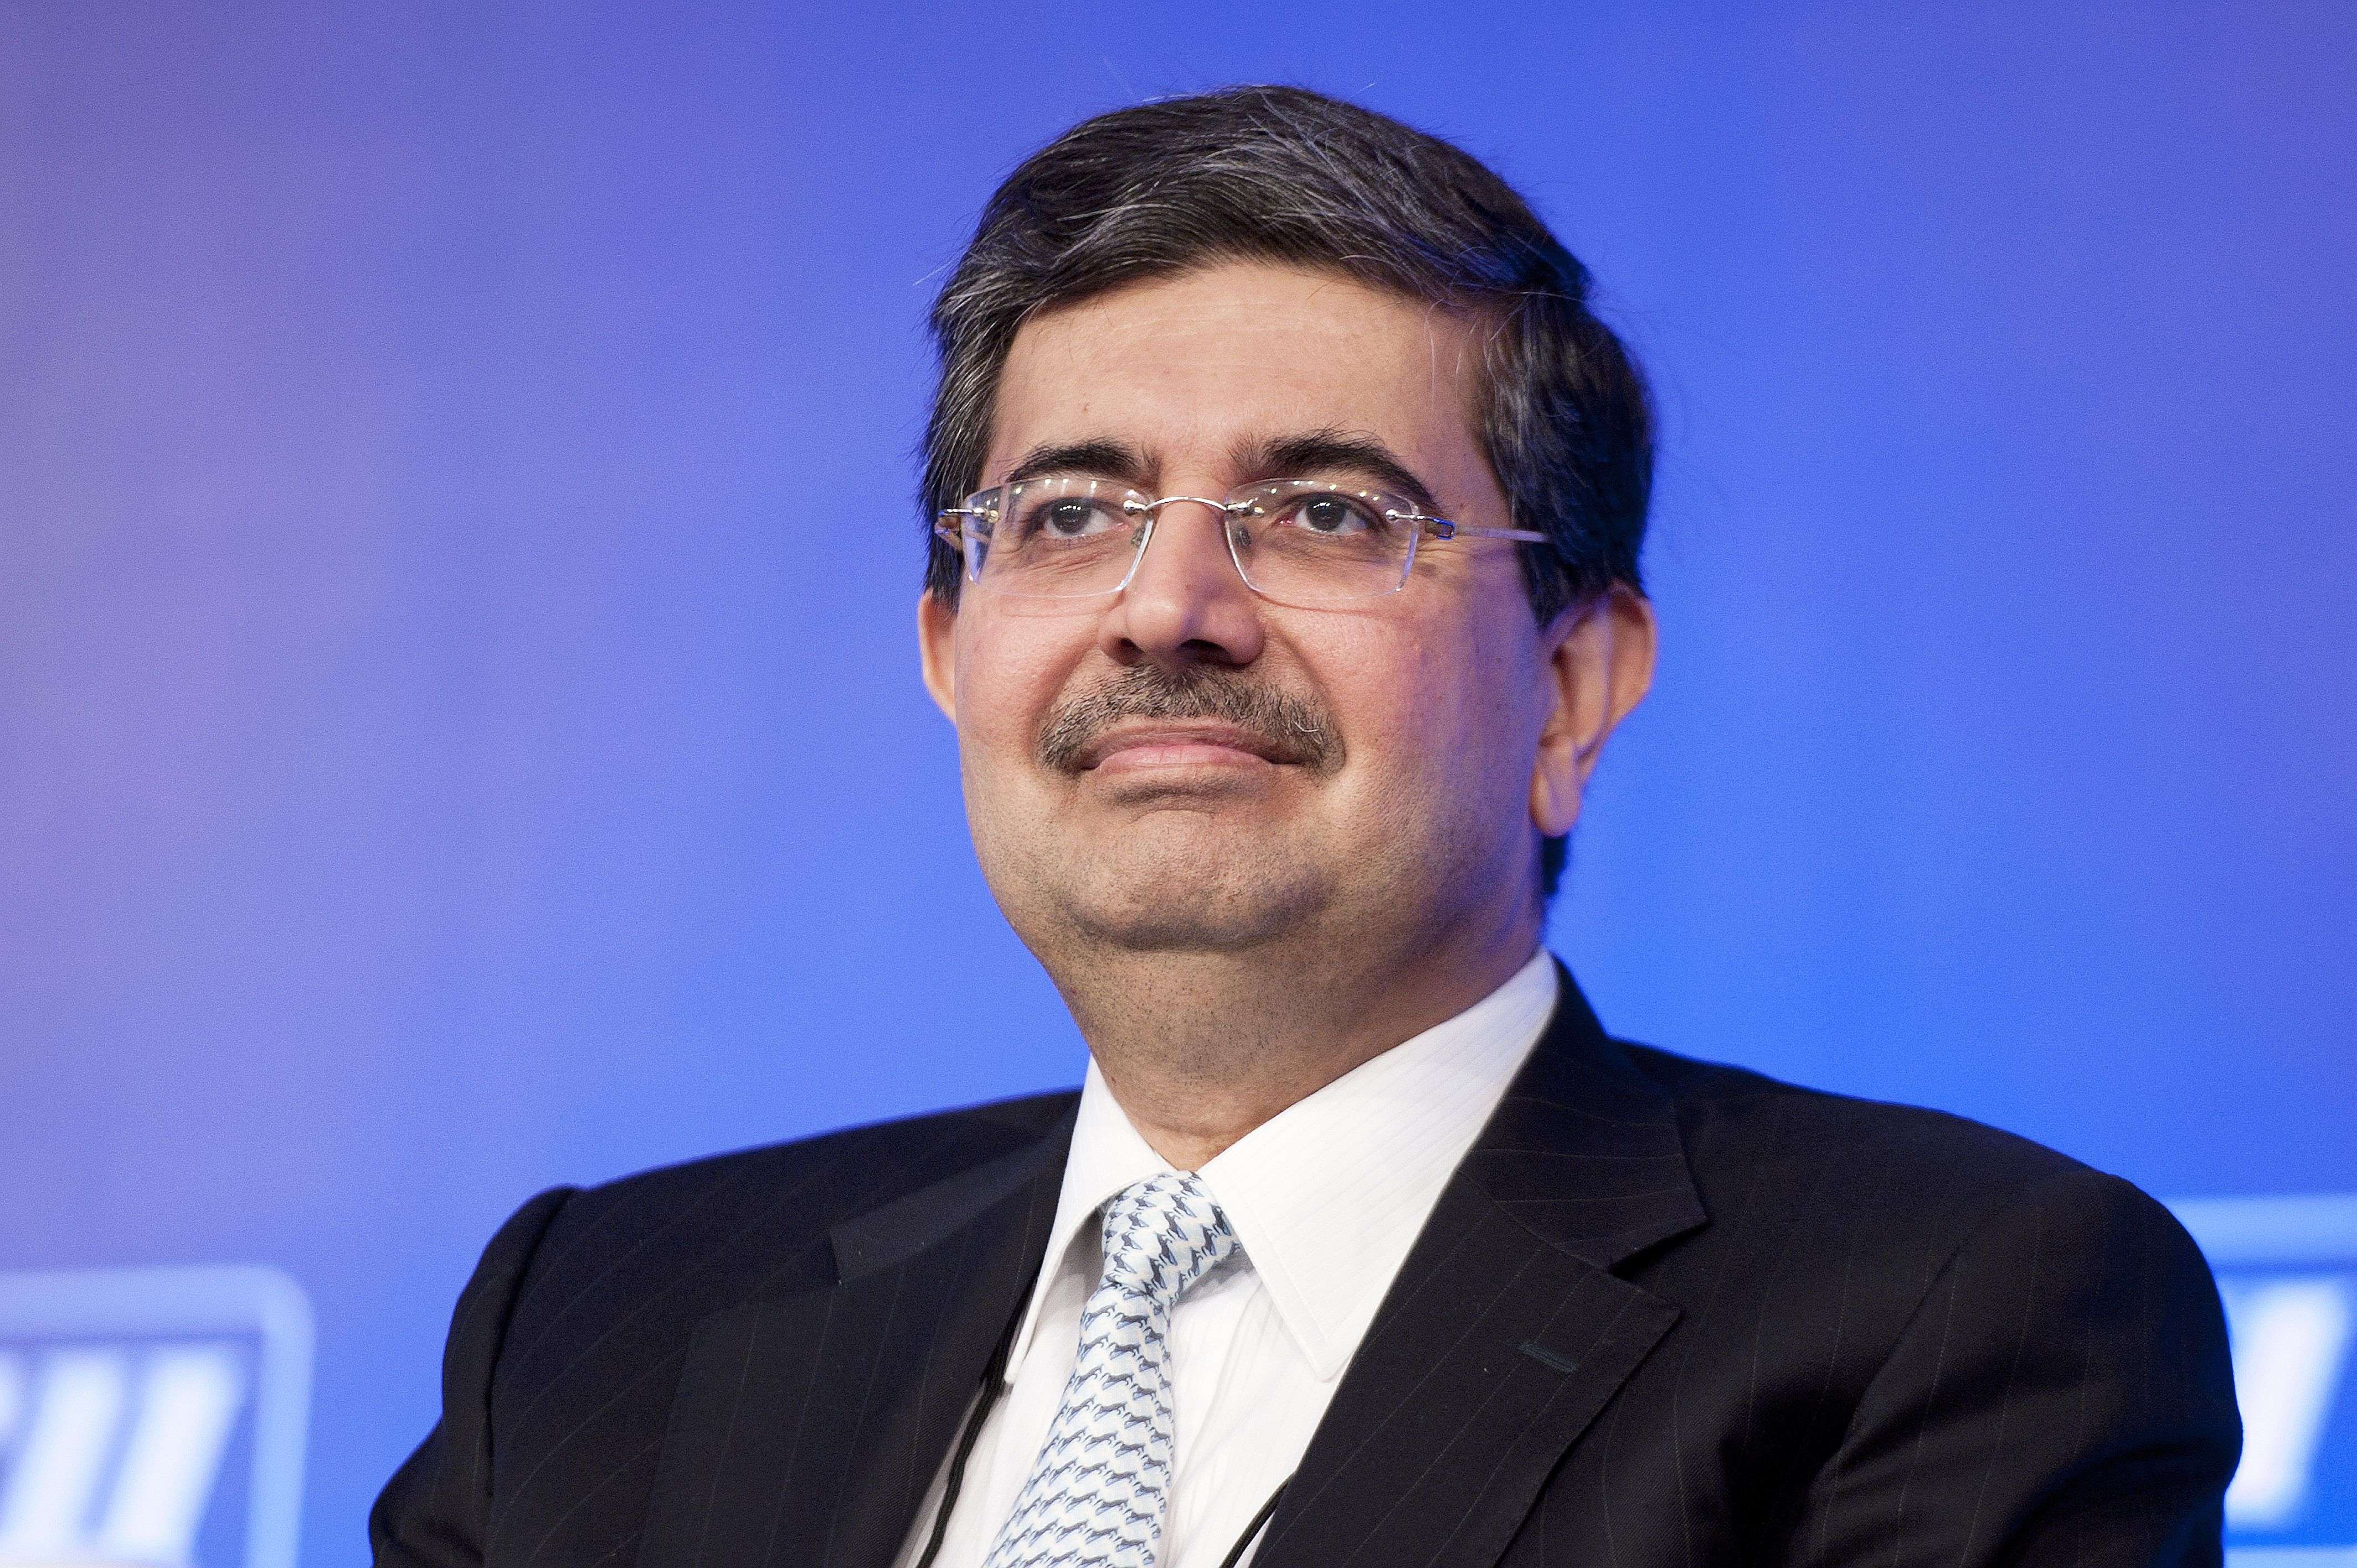 Uday Kotak, Asia's richest banker, multiplied his wealth four times in a  decade | Business Insider India